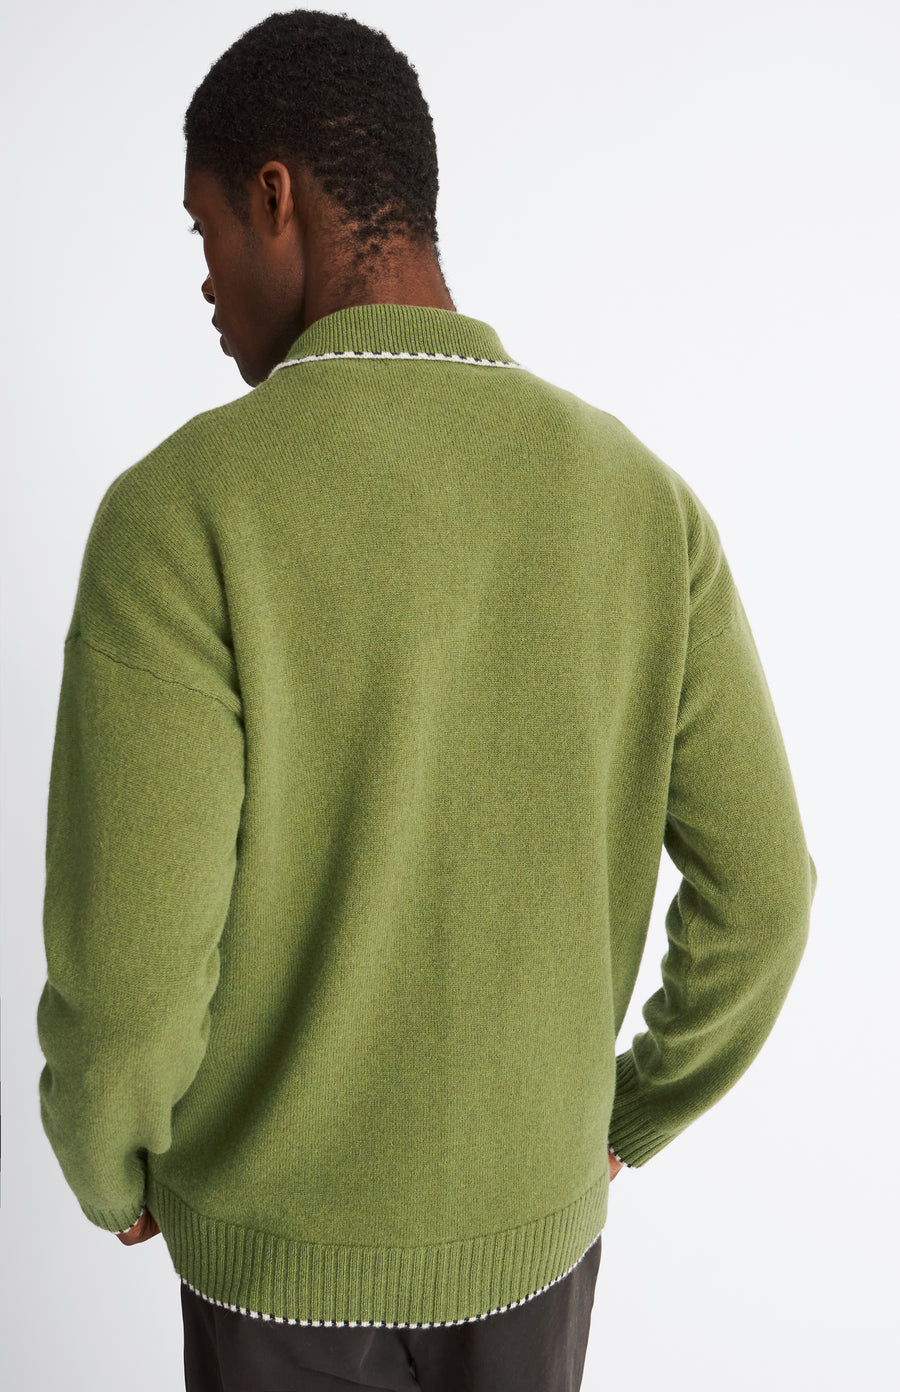 Pringle of Scotland Knitted lambswool overshirt in mineral green with contrast edging rear view